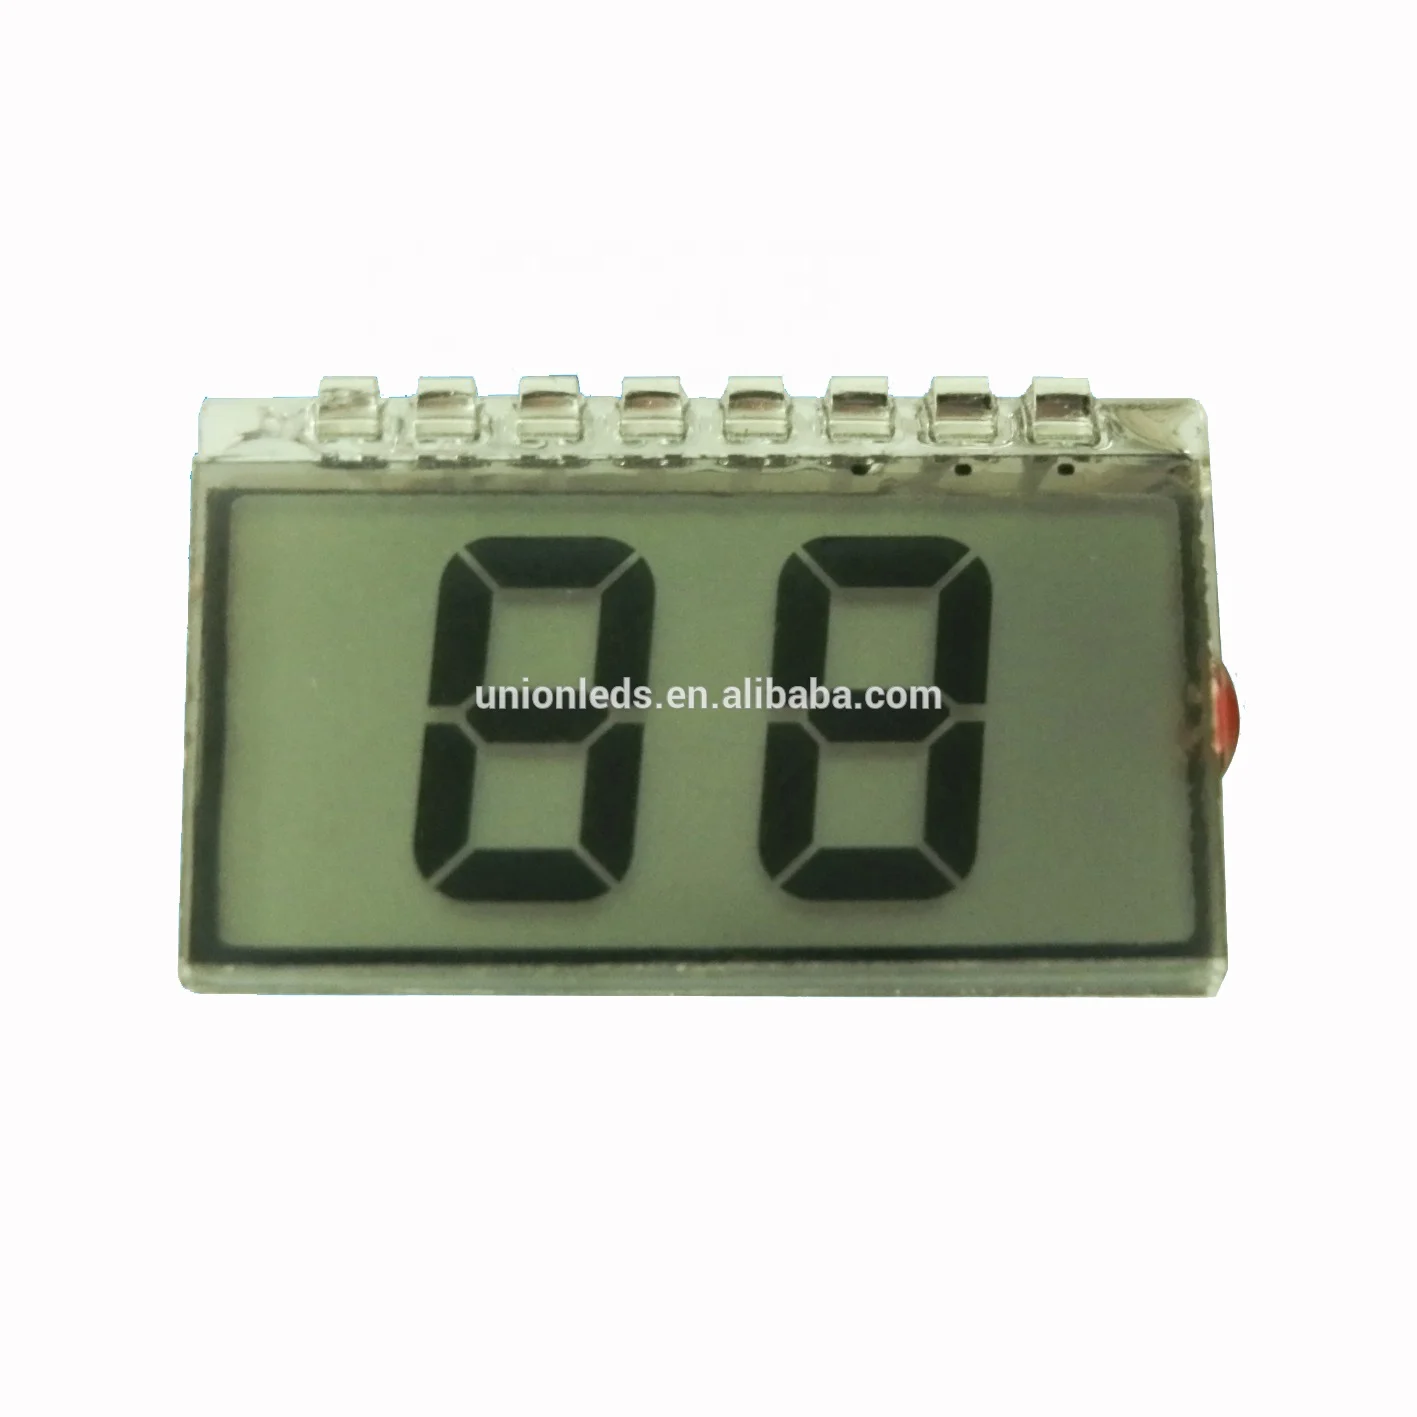 
Lower Cost 2 Digit Segment Display Glass LCD Screen with TN Type 